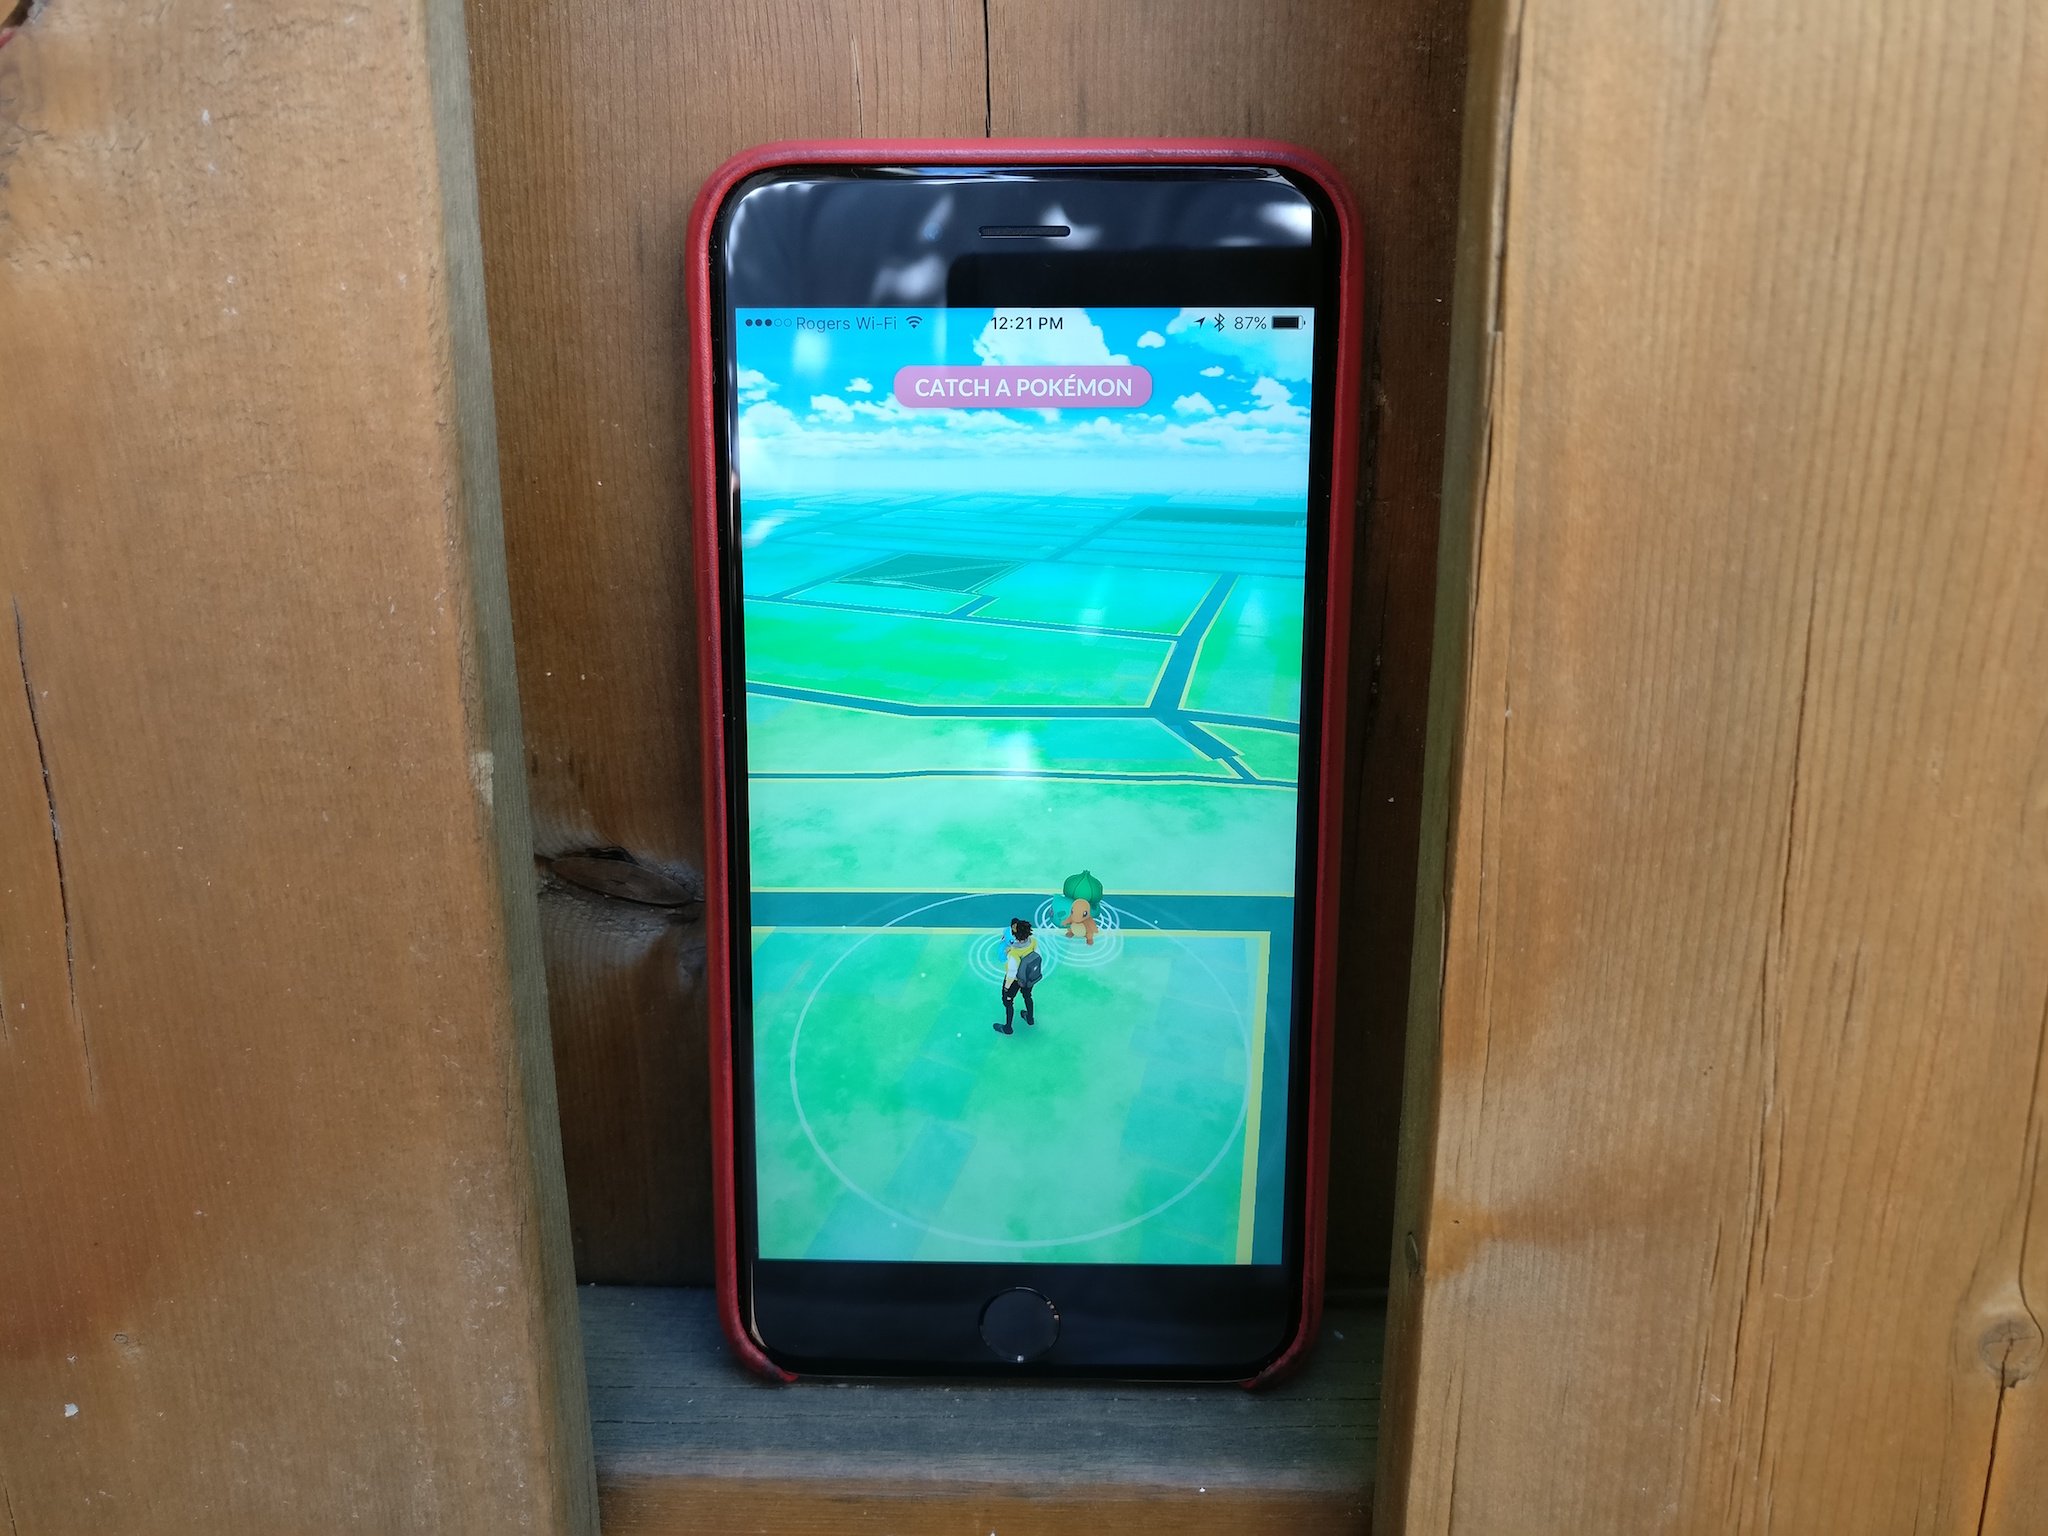 How To Create A Pokemon Go Trainer Club Account on Android